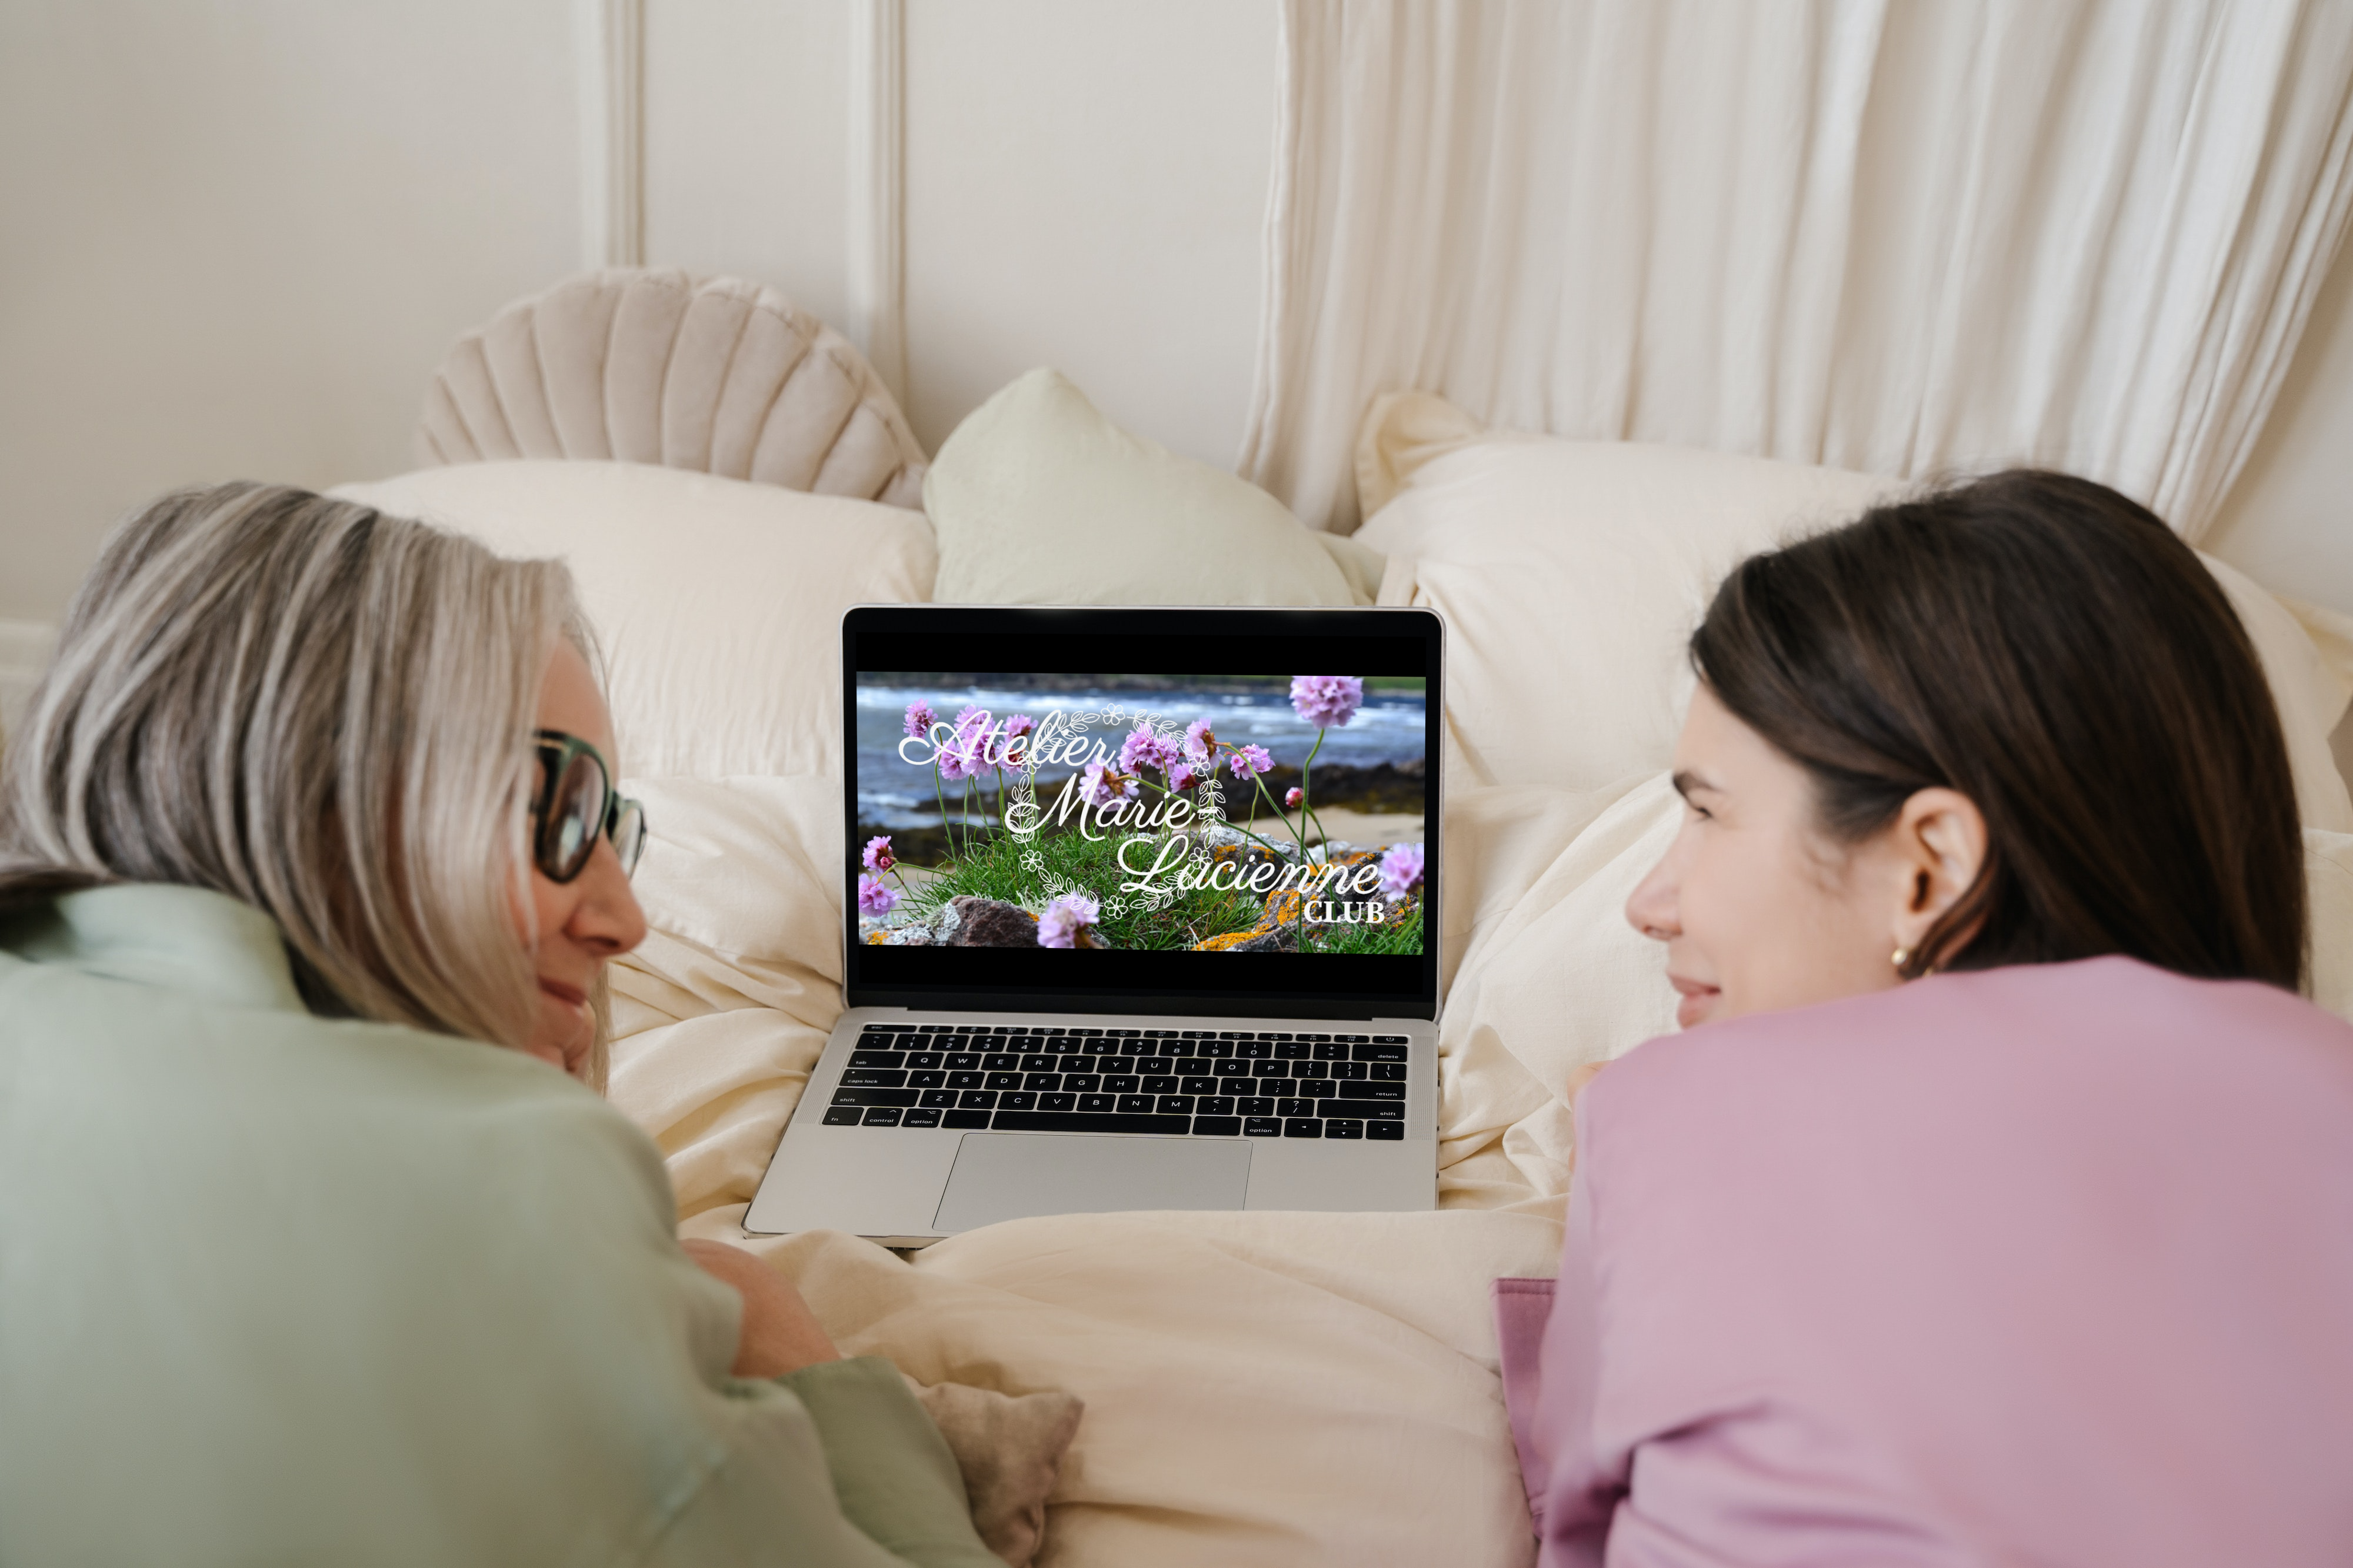 Two women watching the Making of Video on a laptop